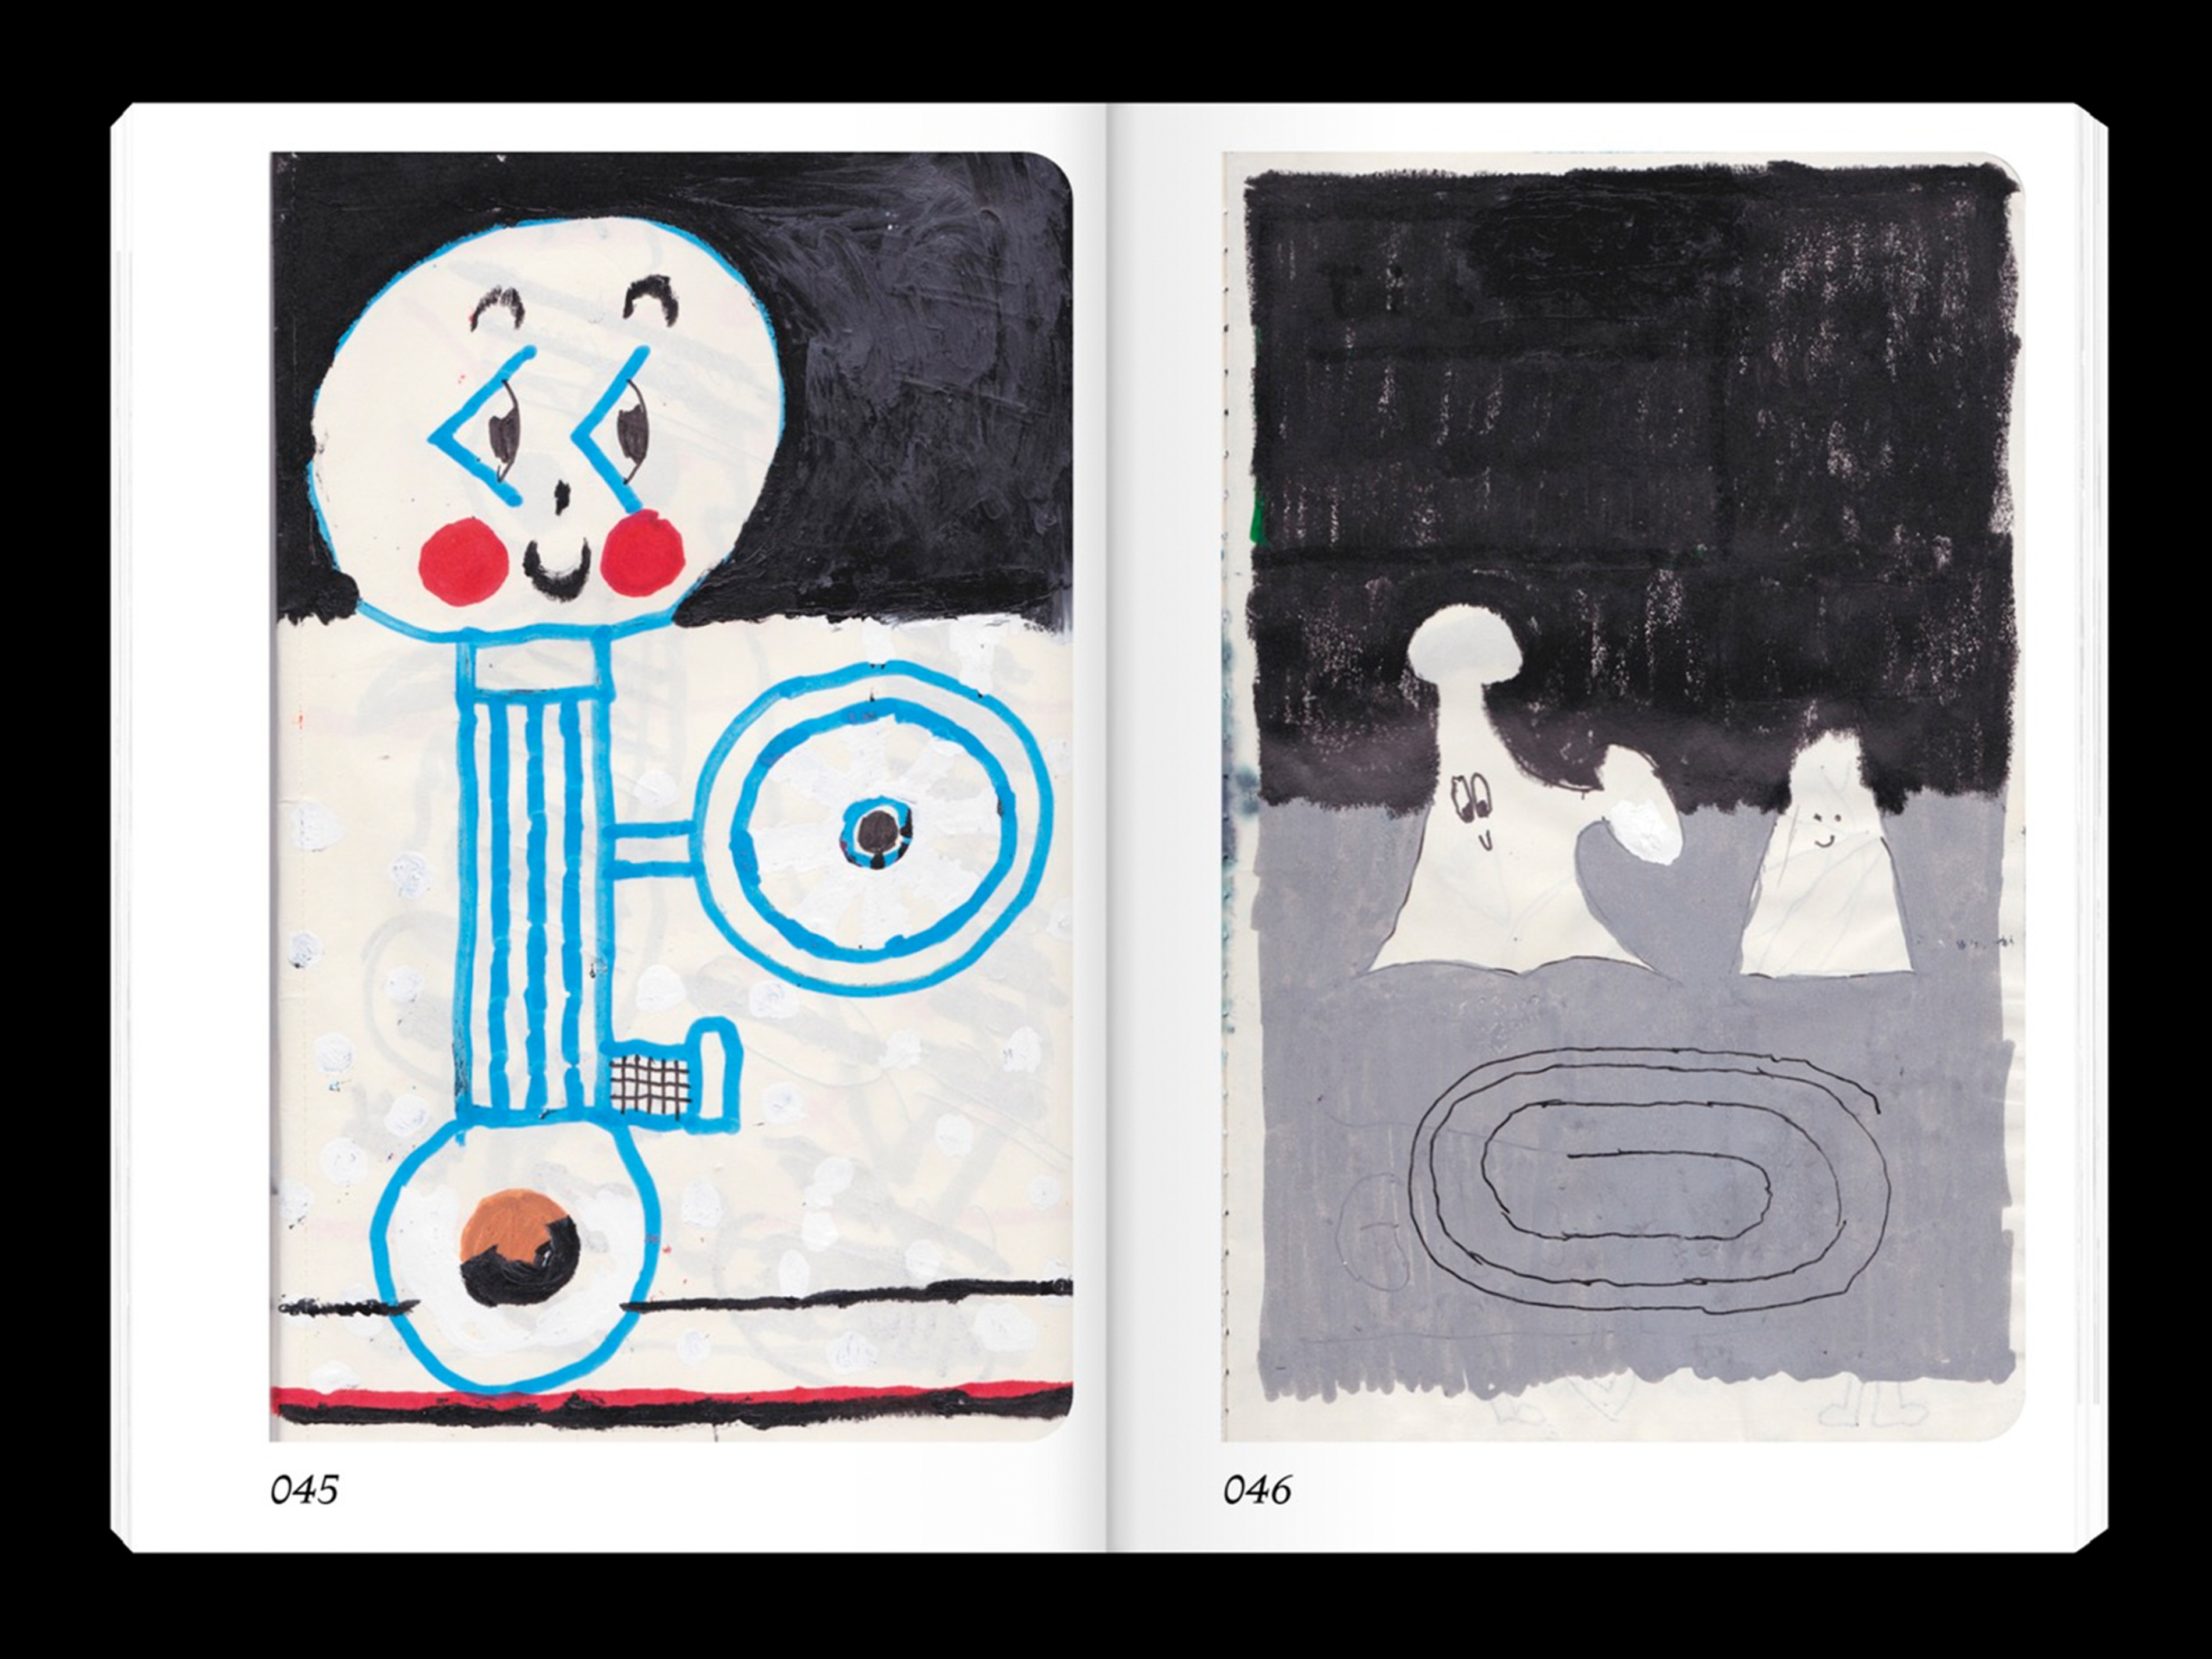 A double page from the book. On the right there is a blue character that drives a car. You can only see one wheel and the steering wheel. On the right oage there are two shapes with faces that stand on a grey surface and both look at a spiral